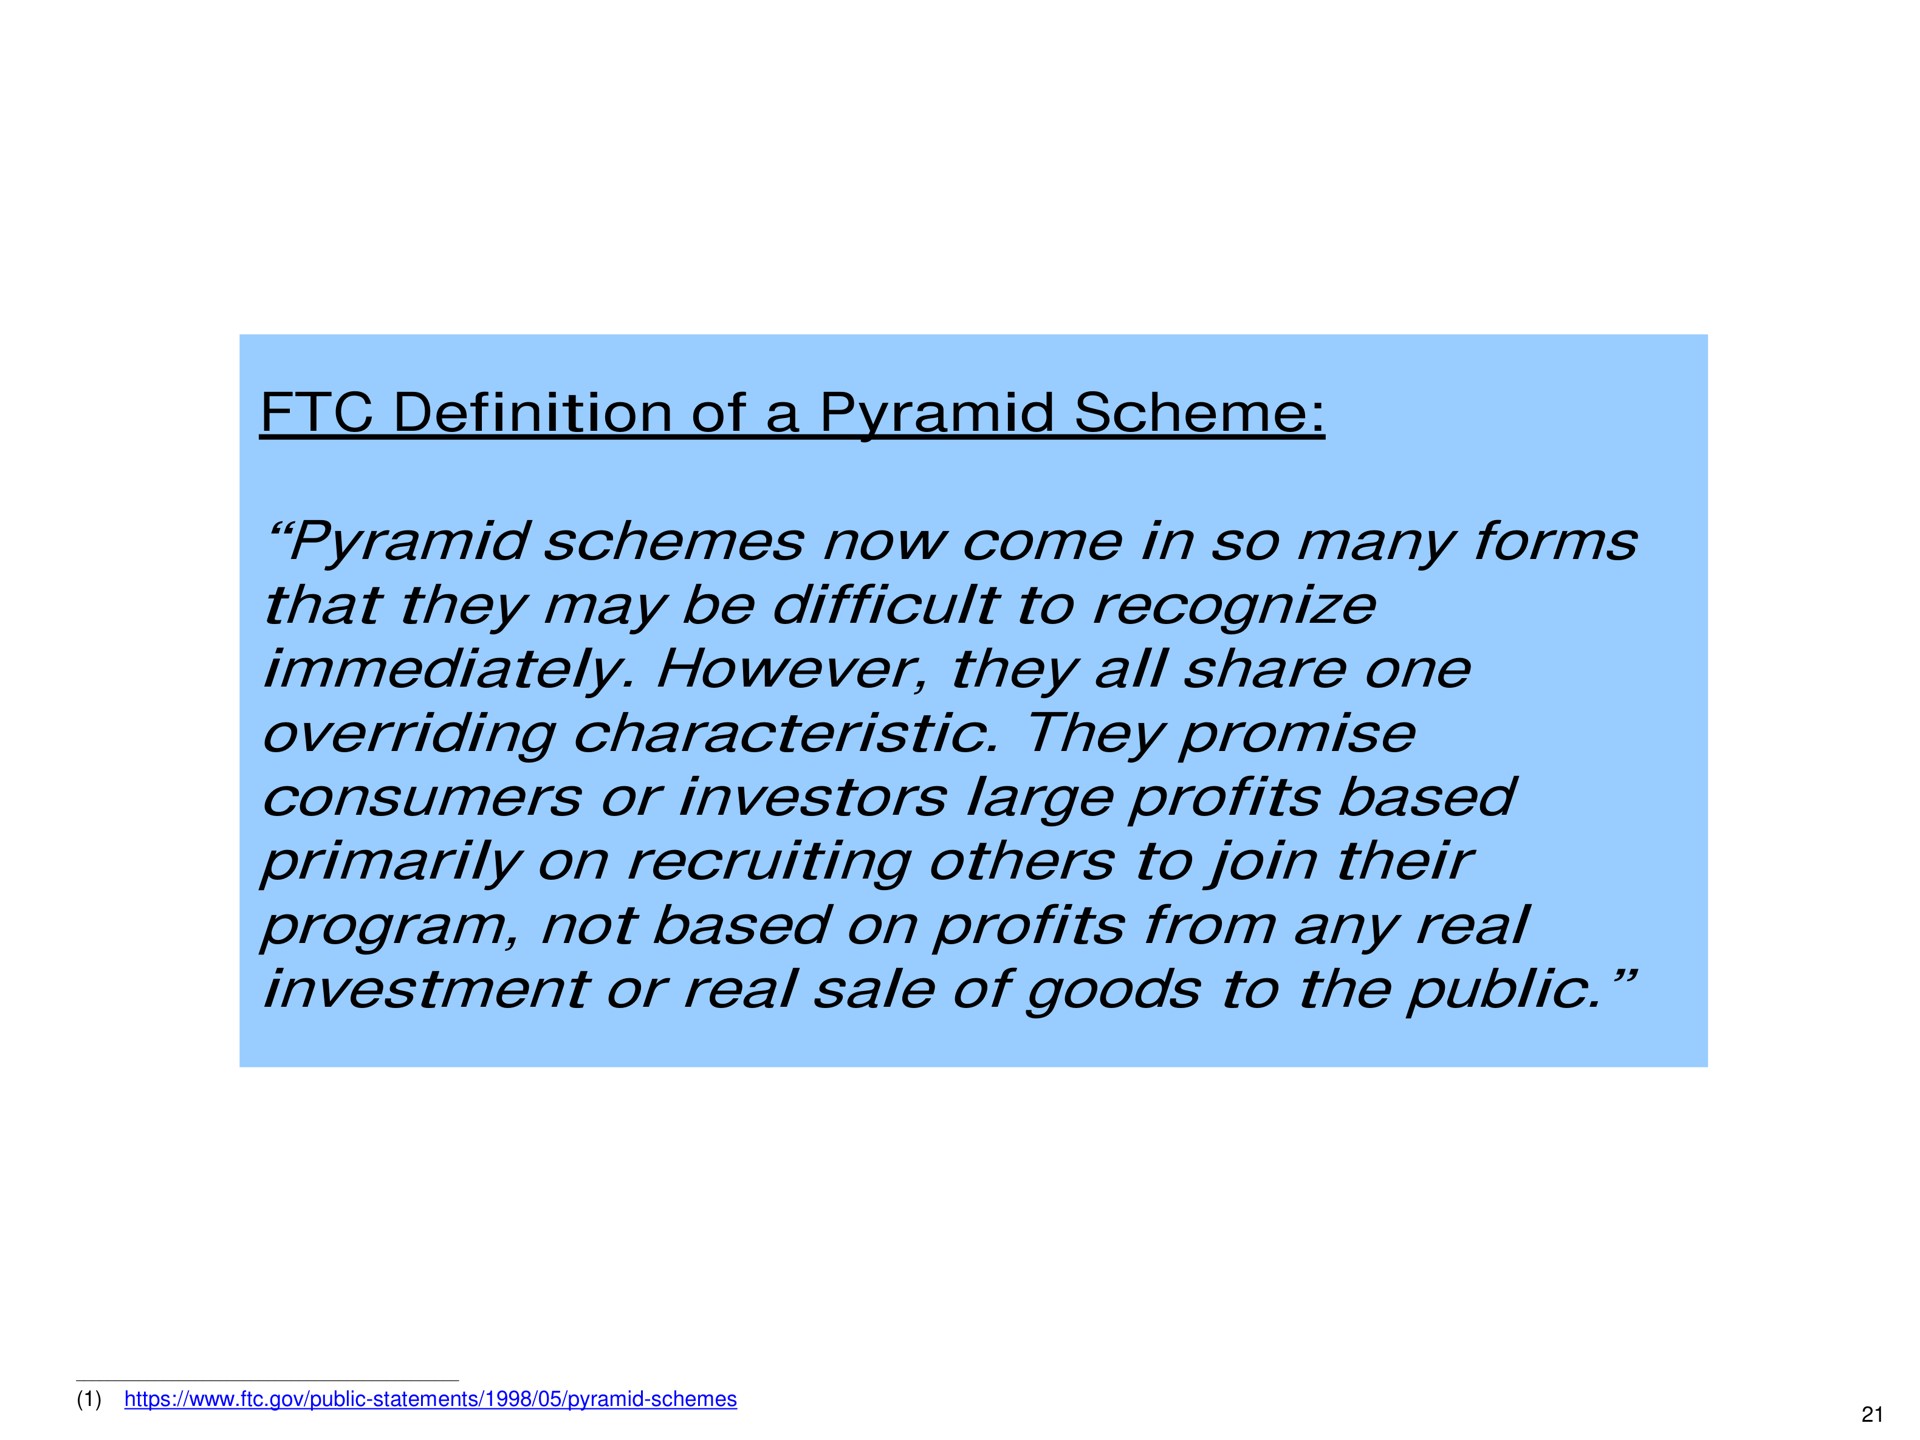 definition of a pyramid scheme pyramid schemes now come in so many forms that they may be difficult to recognize immediately however they all share one overriding characteristic they promise consumers or investors large profits based primarily on recruiting to join their program not based on profits from any real investment or real sale of goods to the public | Pershing Square